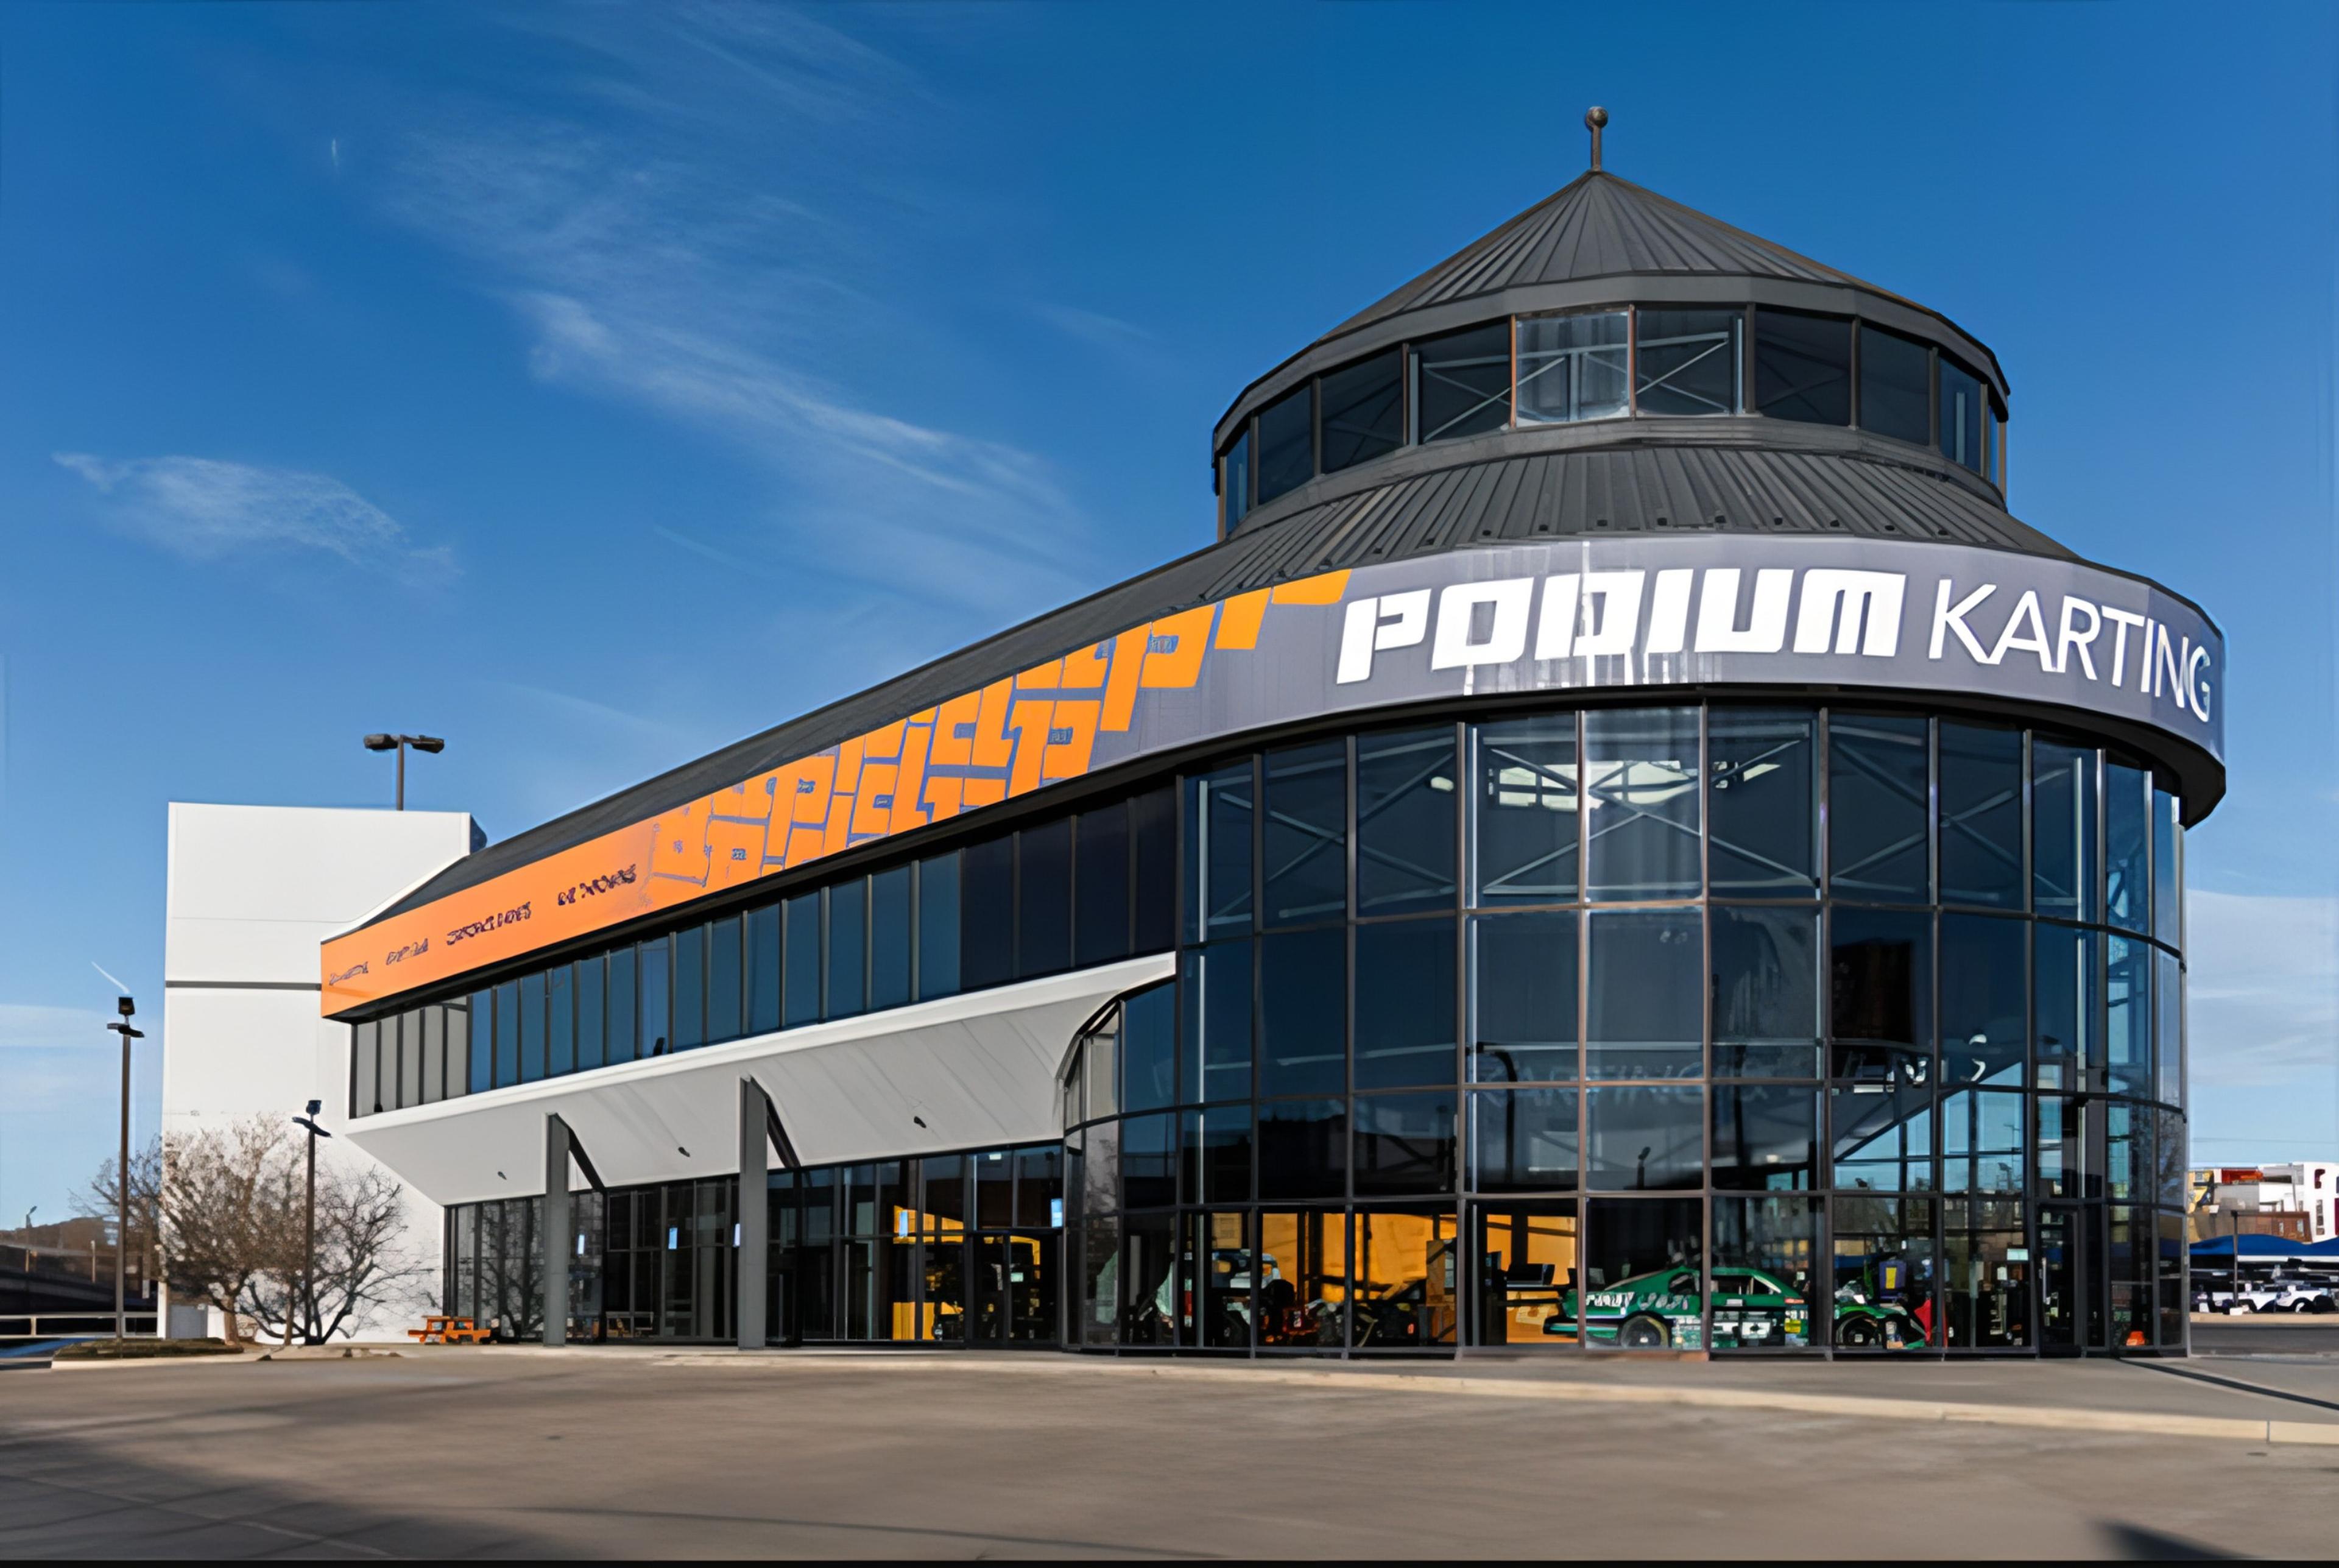 Podium Karting and Events